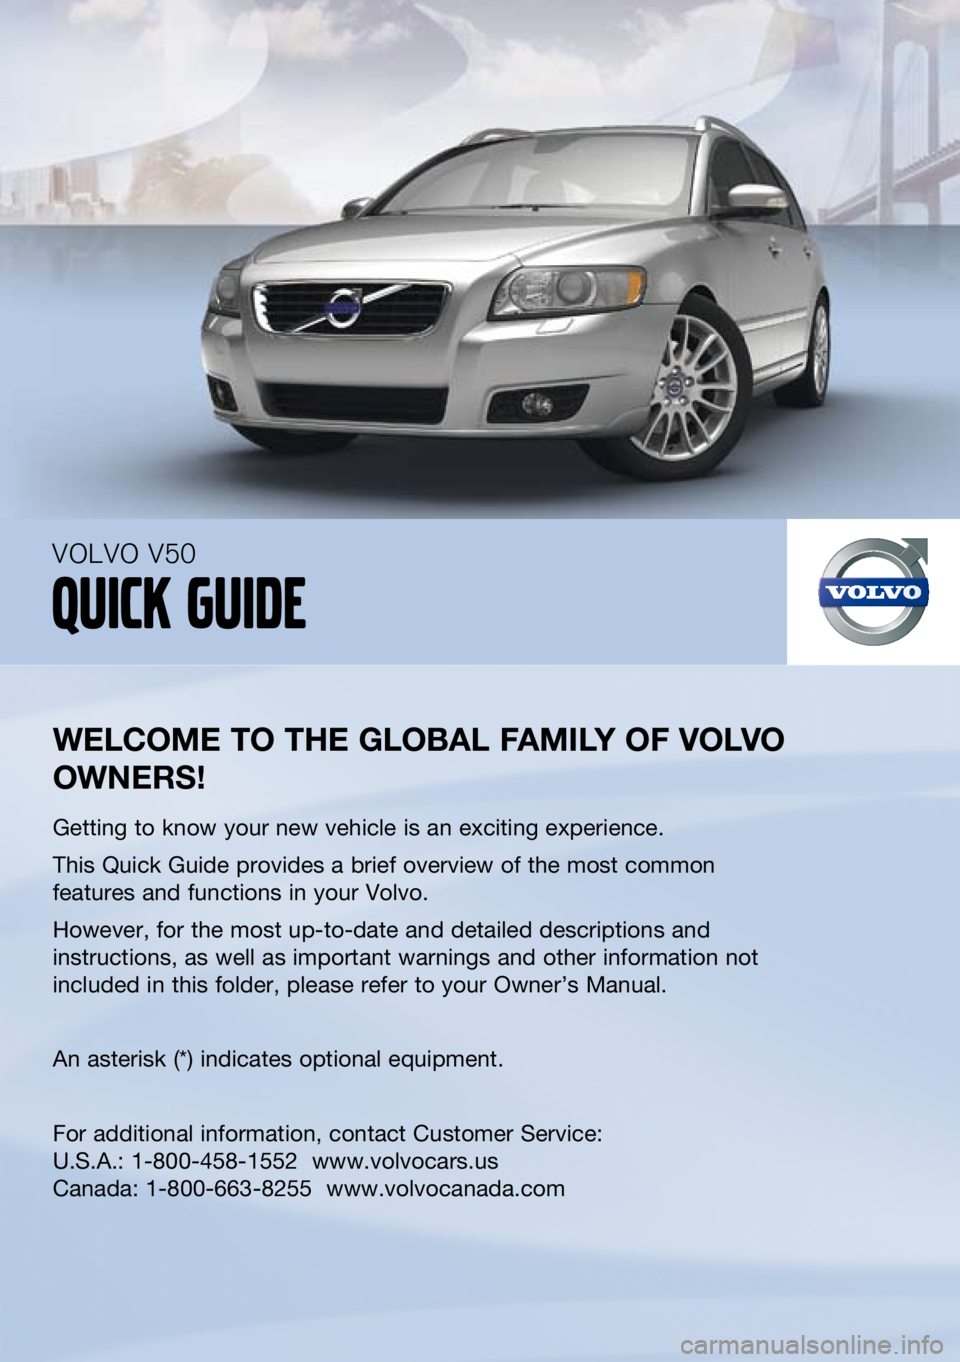 VOLVO V50 2011  Quick Guide 
    --
welcome to the  global F amIly  oF  volvo 
owners !
Getting to know your new vehicle is an exciting experience.
This Quick Guide provides a brief overview of the most common 
features and func